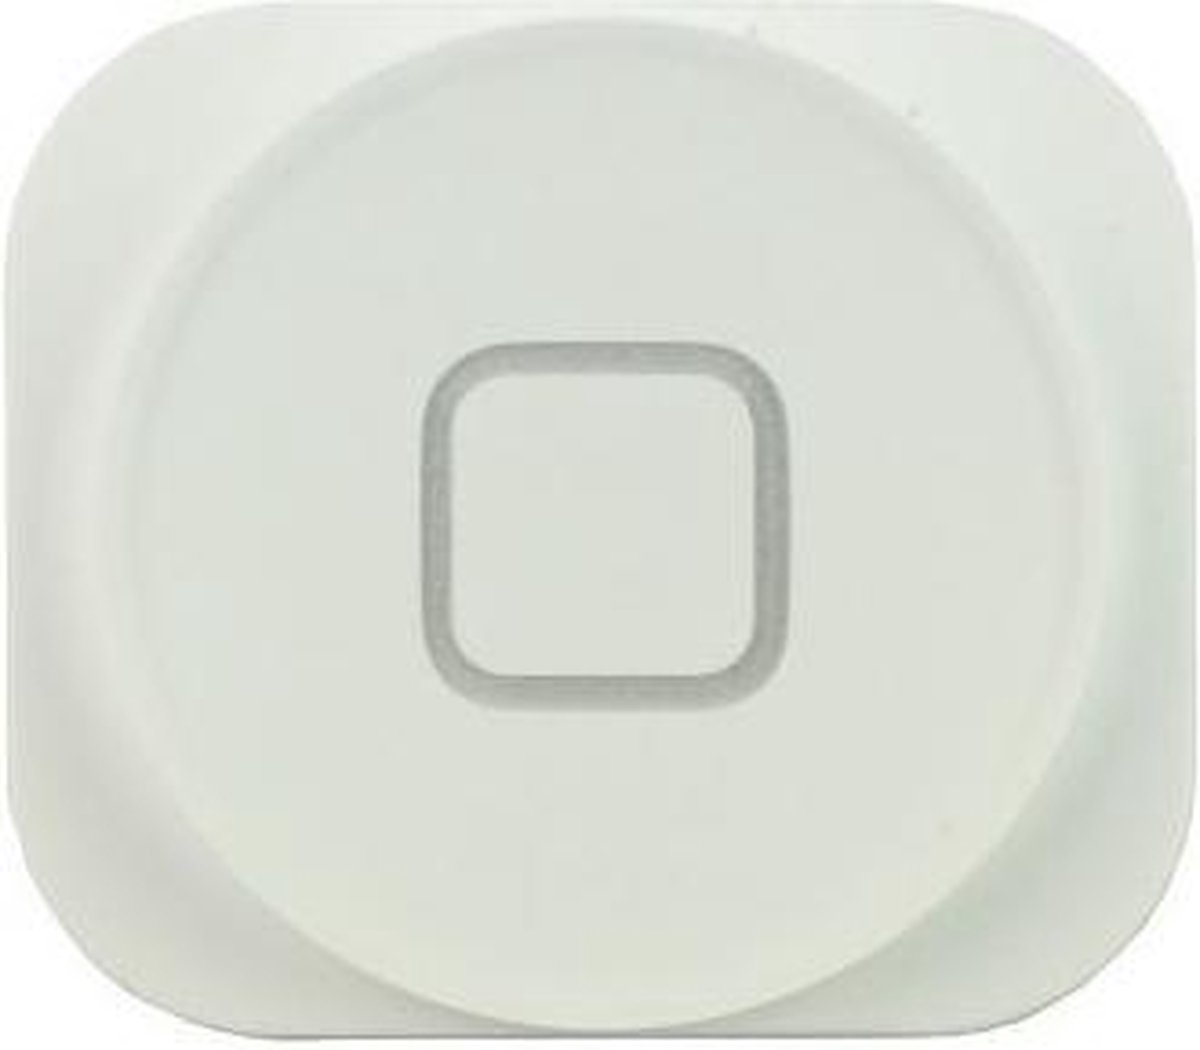 iPhone 5 home button met gasket - wit